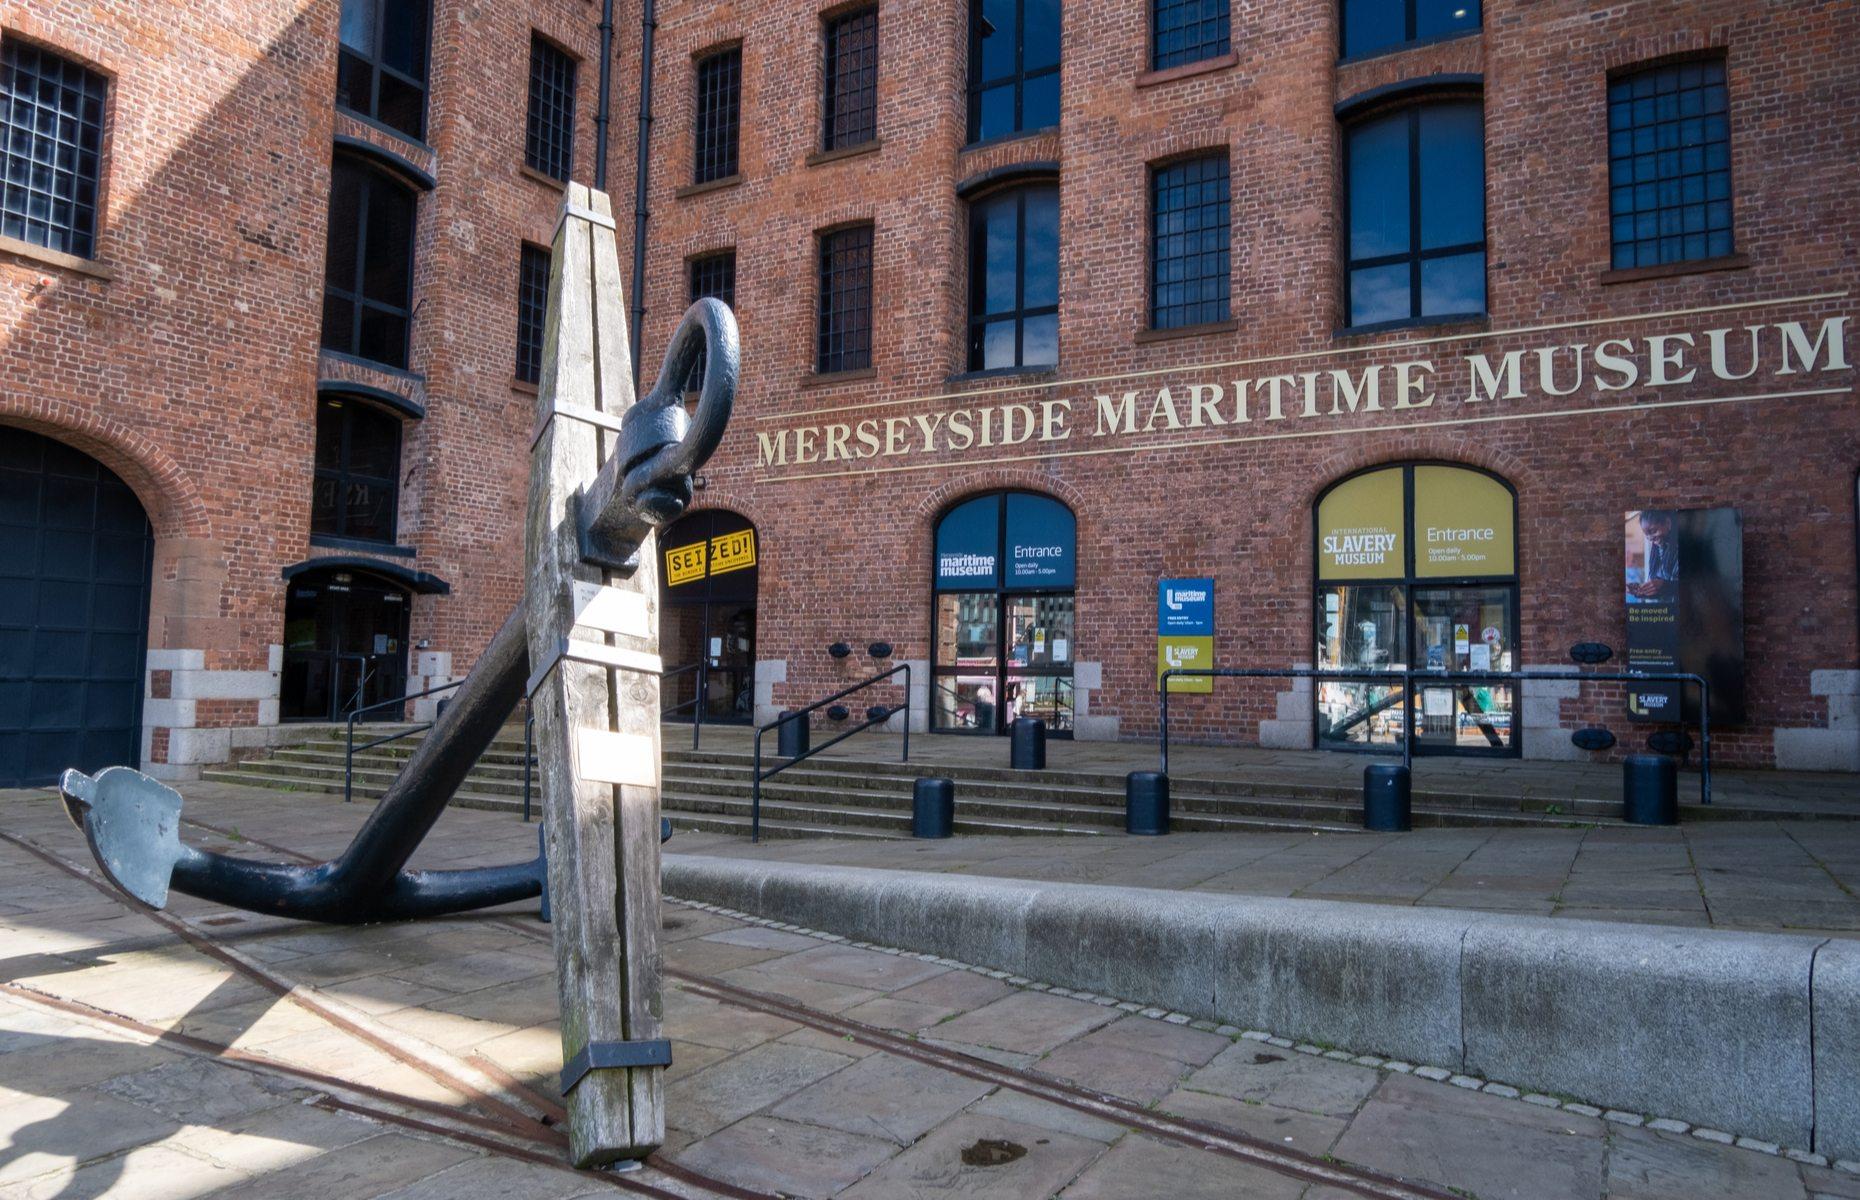 <p>Although the Titanic didn't ever visit Liverpool, she was registered here and had strong links to the maritime city. In fact, the word Liverpool was emblazoned on the ship below the name Titanic. <a href="http://www.liverpoolmuseums.org.uk/titanic">Merseyside Maritime Museum's </a><a href="https://www.liverpoolmuseums.org.uk/titanic">exhibition</a> examines the largely untold story of the Titanic's connection to the city. It was in Albion House, the Liverpool headquarters of the White Star Line, that chairman J Bruce Ismay worked on the plan to build the Titanic and sister ships Olympic and Britannic. Ismay was a survivor of the Titanic disaster.</p>  <p><strong><a href="https://www.loveexploring.com/news/94344/the-tragic-tale-of-the-titanics-lost-sister-ship">The tragic tale of the Titanic's sister ship the Britannic</a></strong></p>